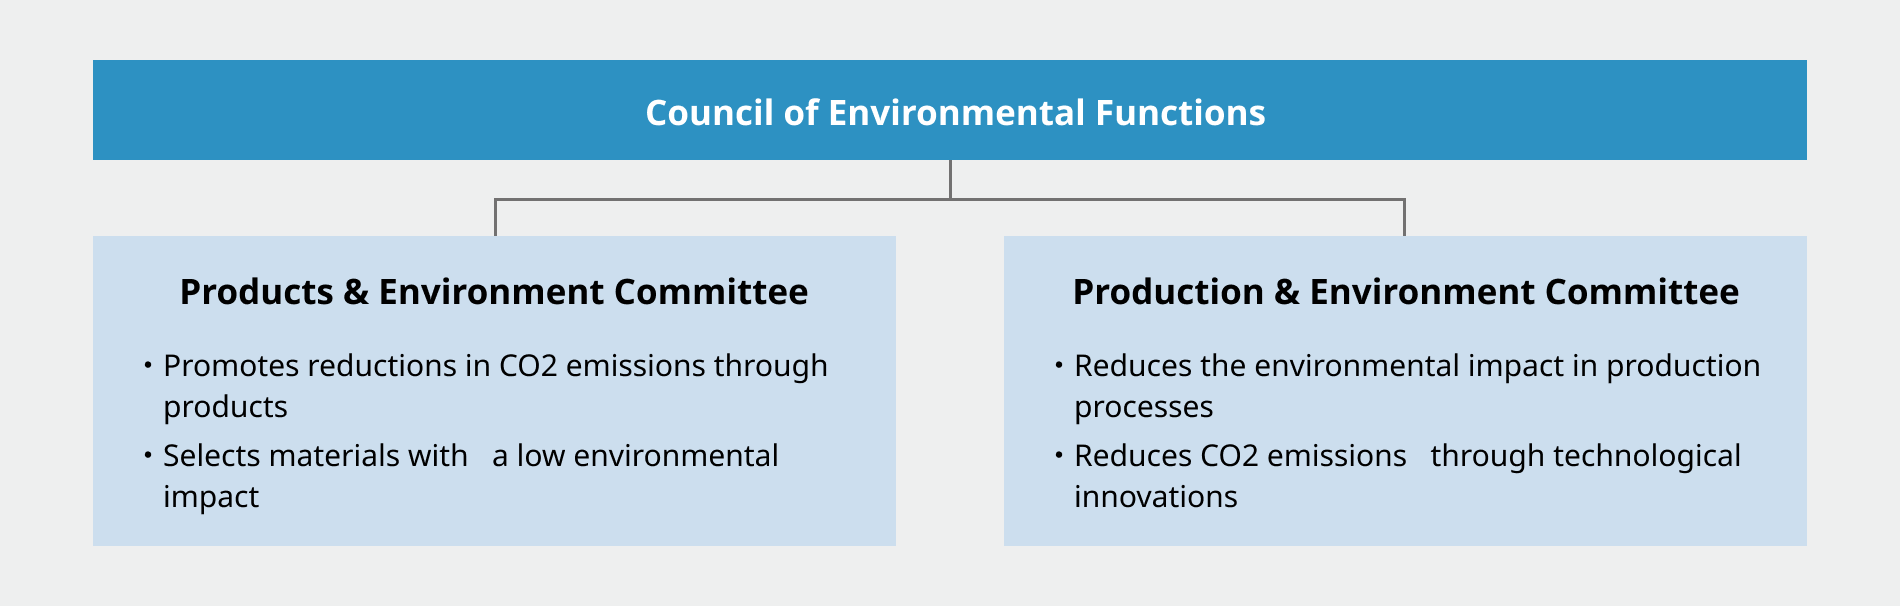 Council of Environmental Functions Products & Environment Committee ・Promotes reductions in CO2 emissions through products　・Selects materials with a low environmental impact　Production & Environment Committee　・Reduces the environmental impact in production processes　・Reduces CO2 emissions through technological innovations